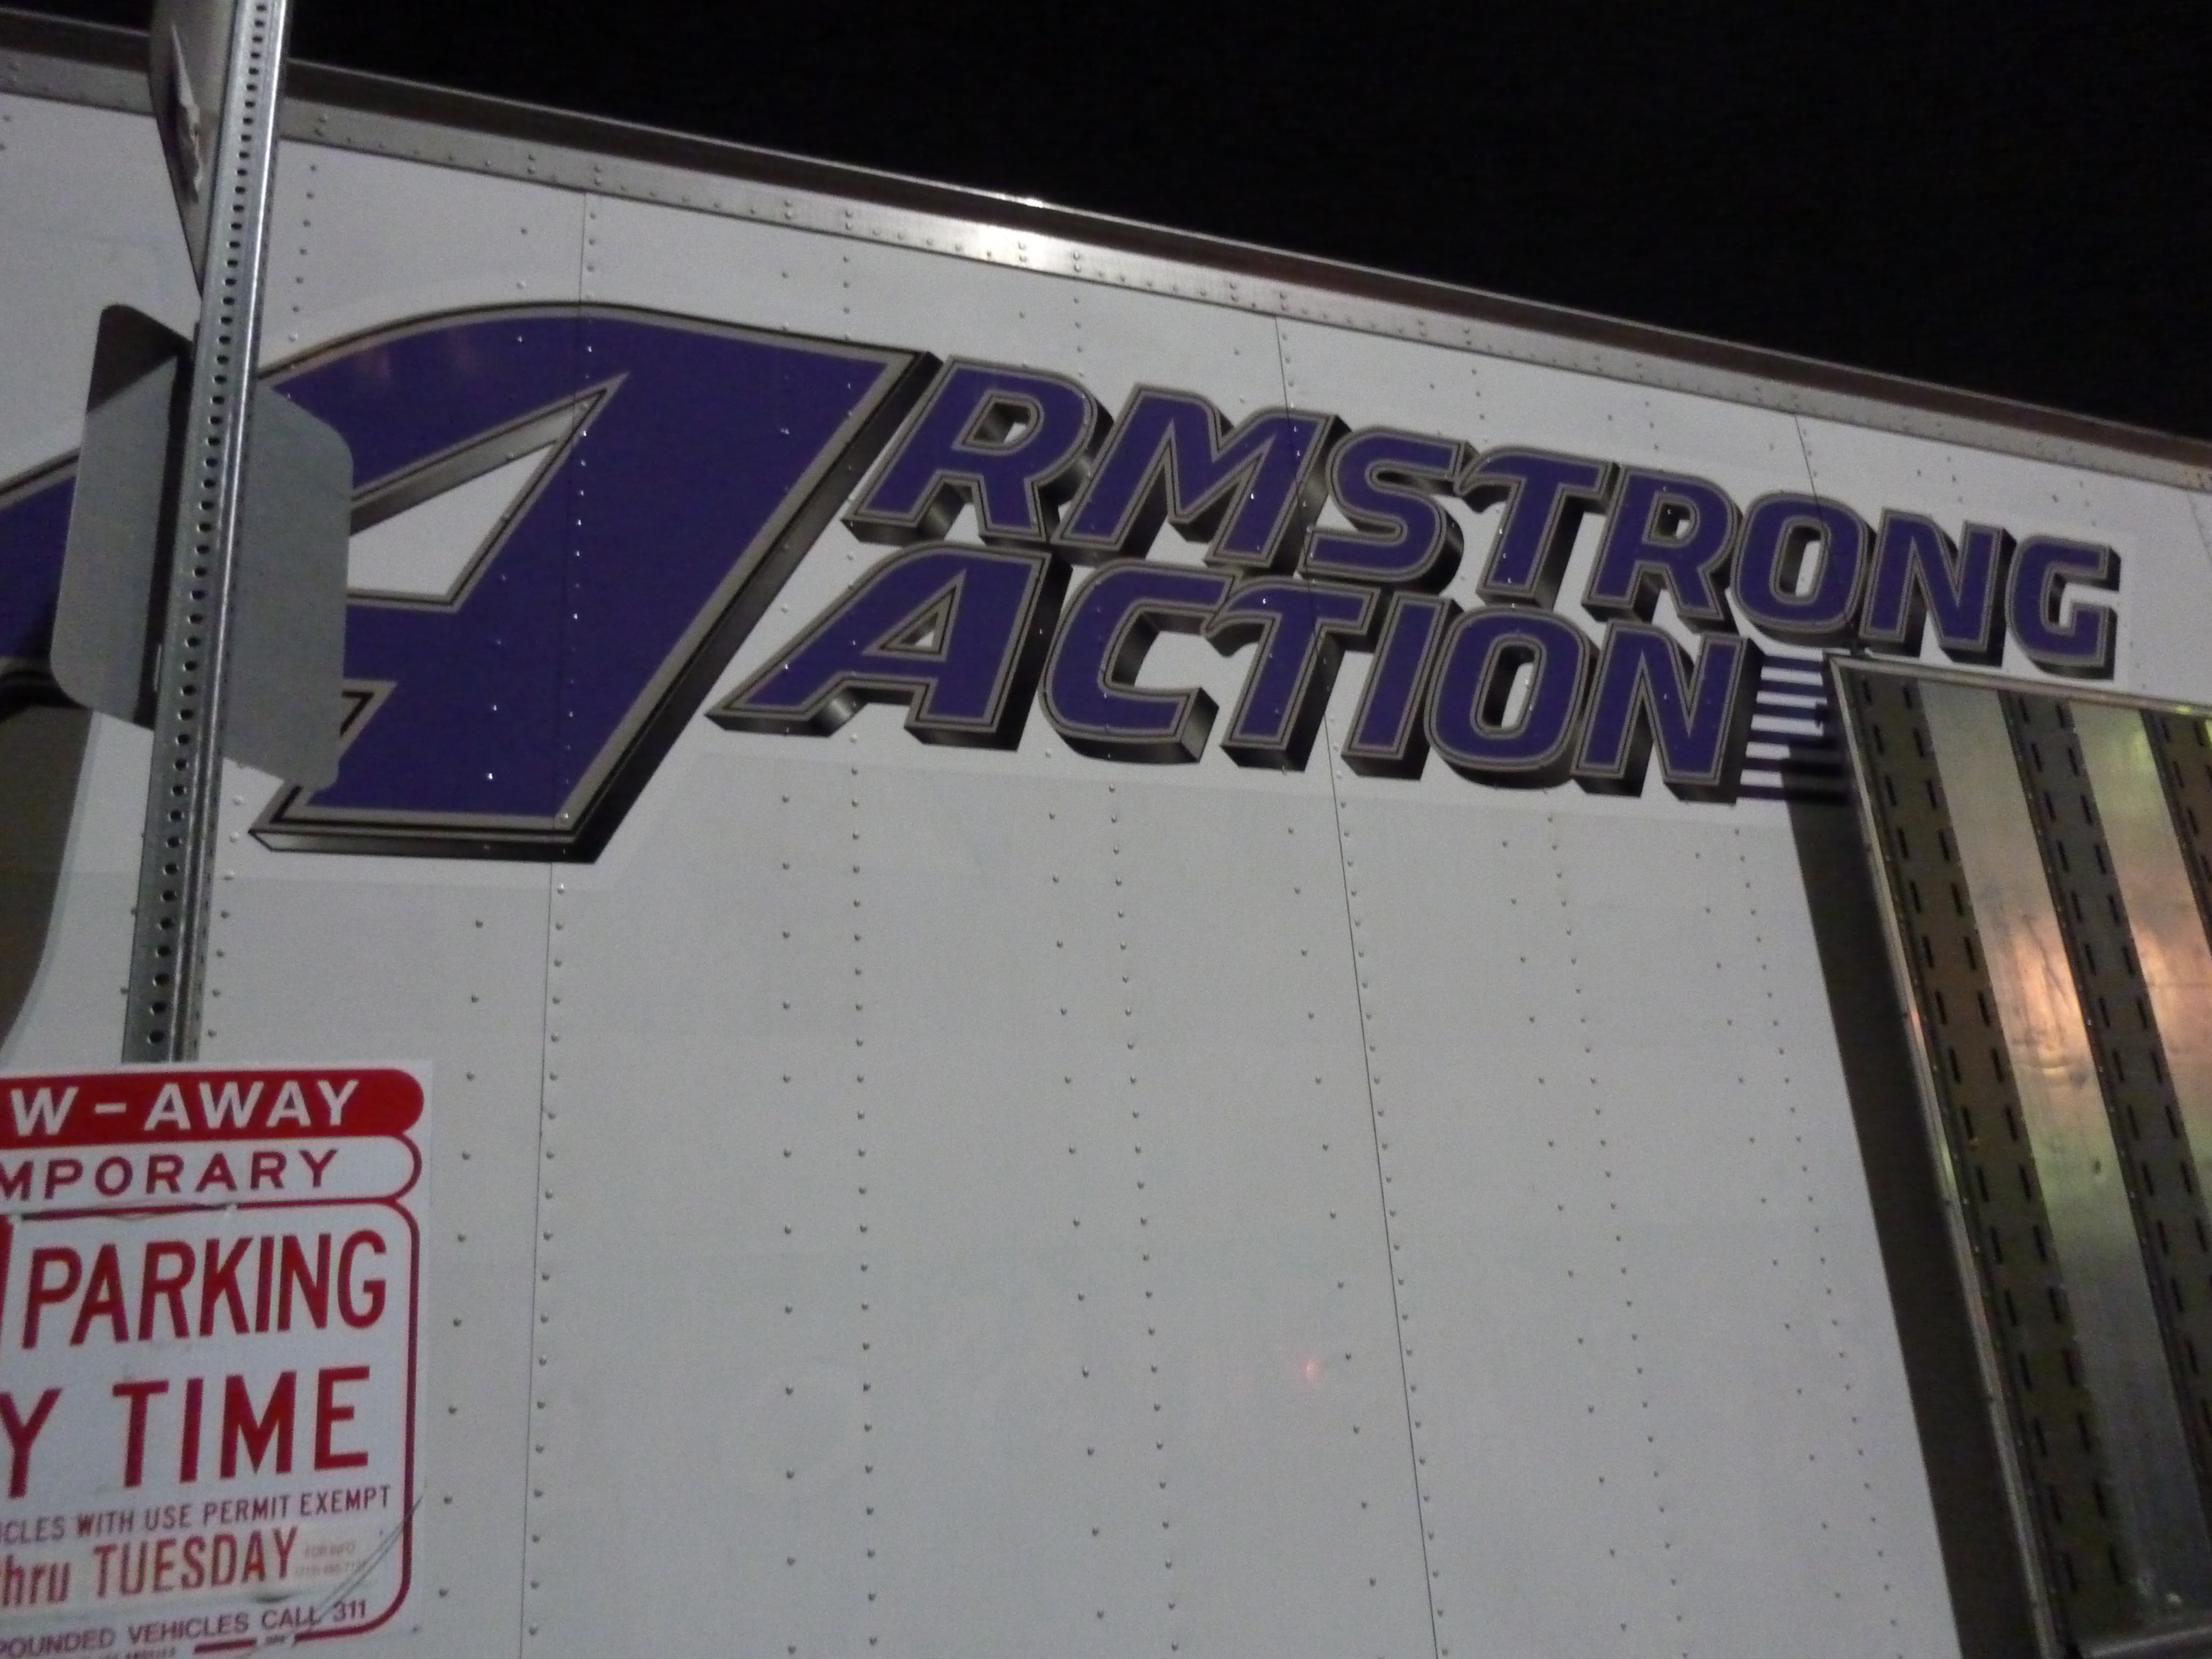 Armstrong Action 48 Foot Trailer #1 on Location in Hollywood 